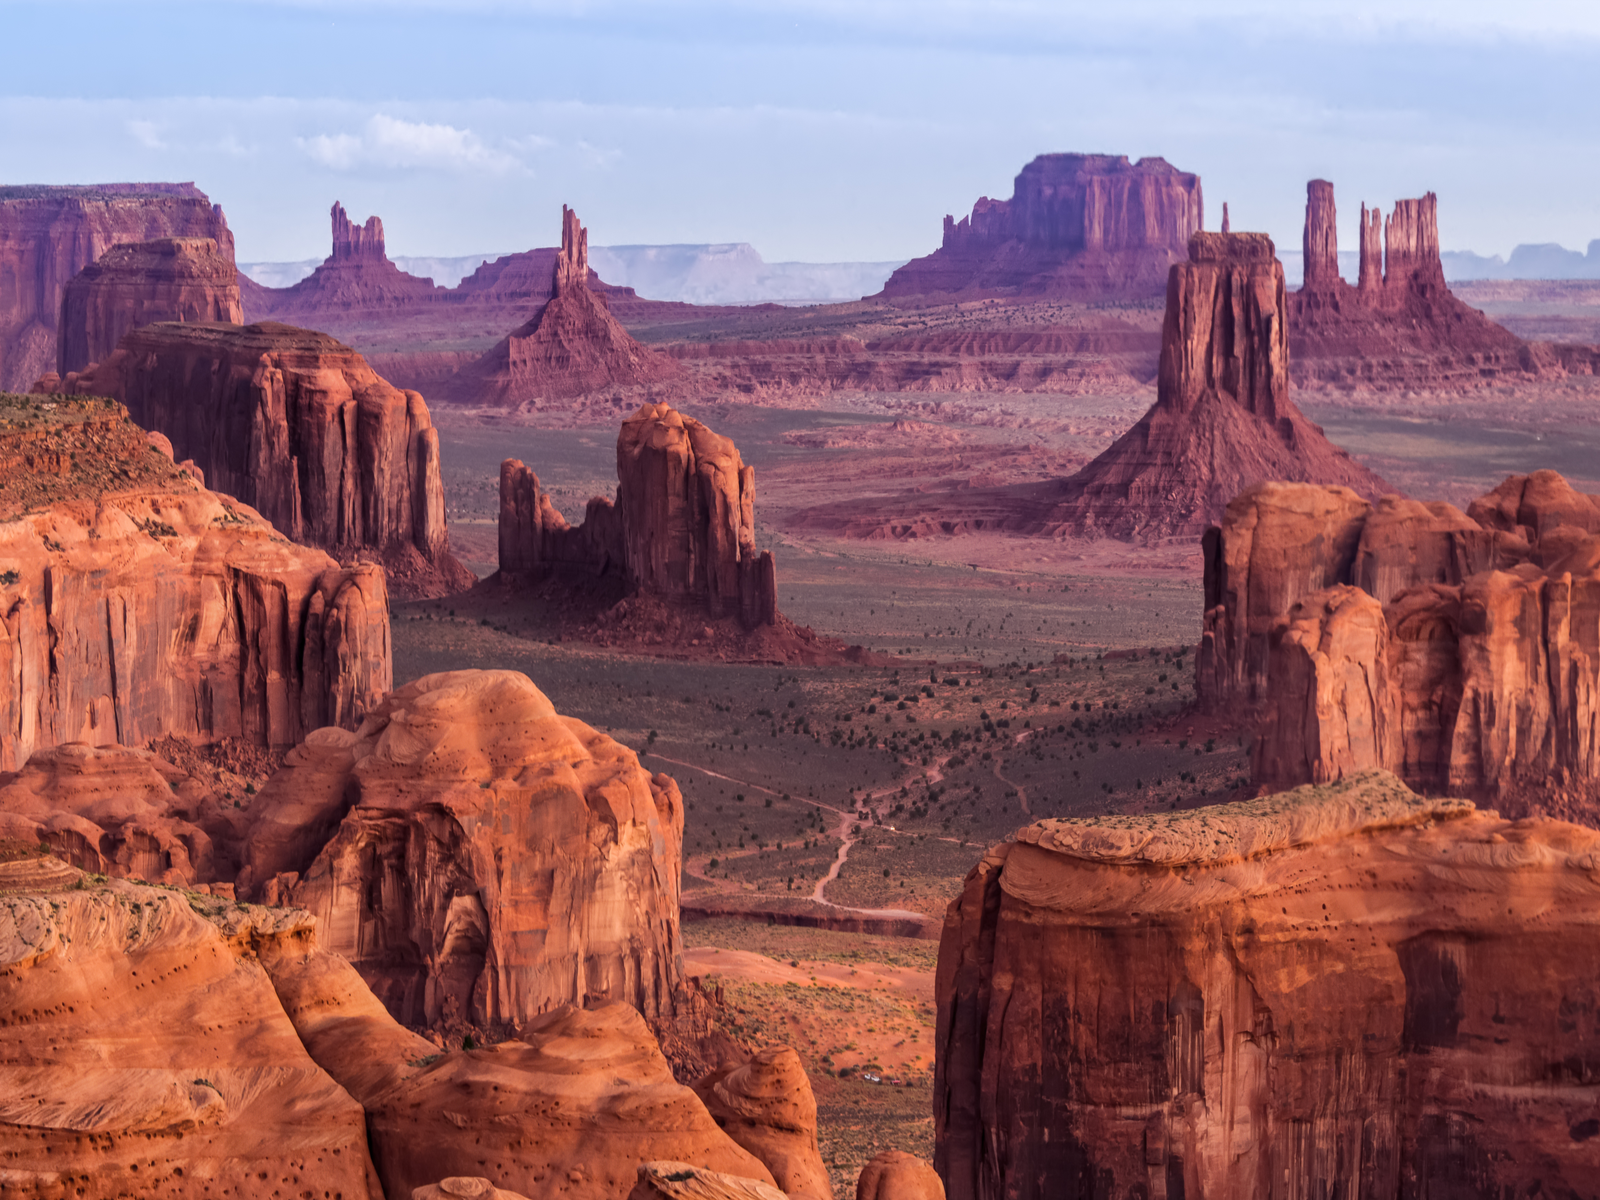 Mesmerizing Red-colored land formations at Monument Valley, one of the most beautiful places in the US